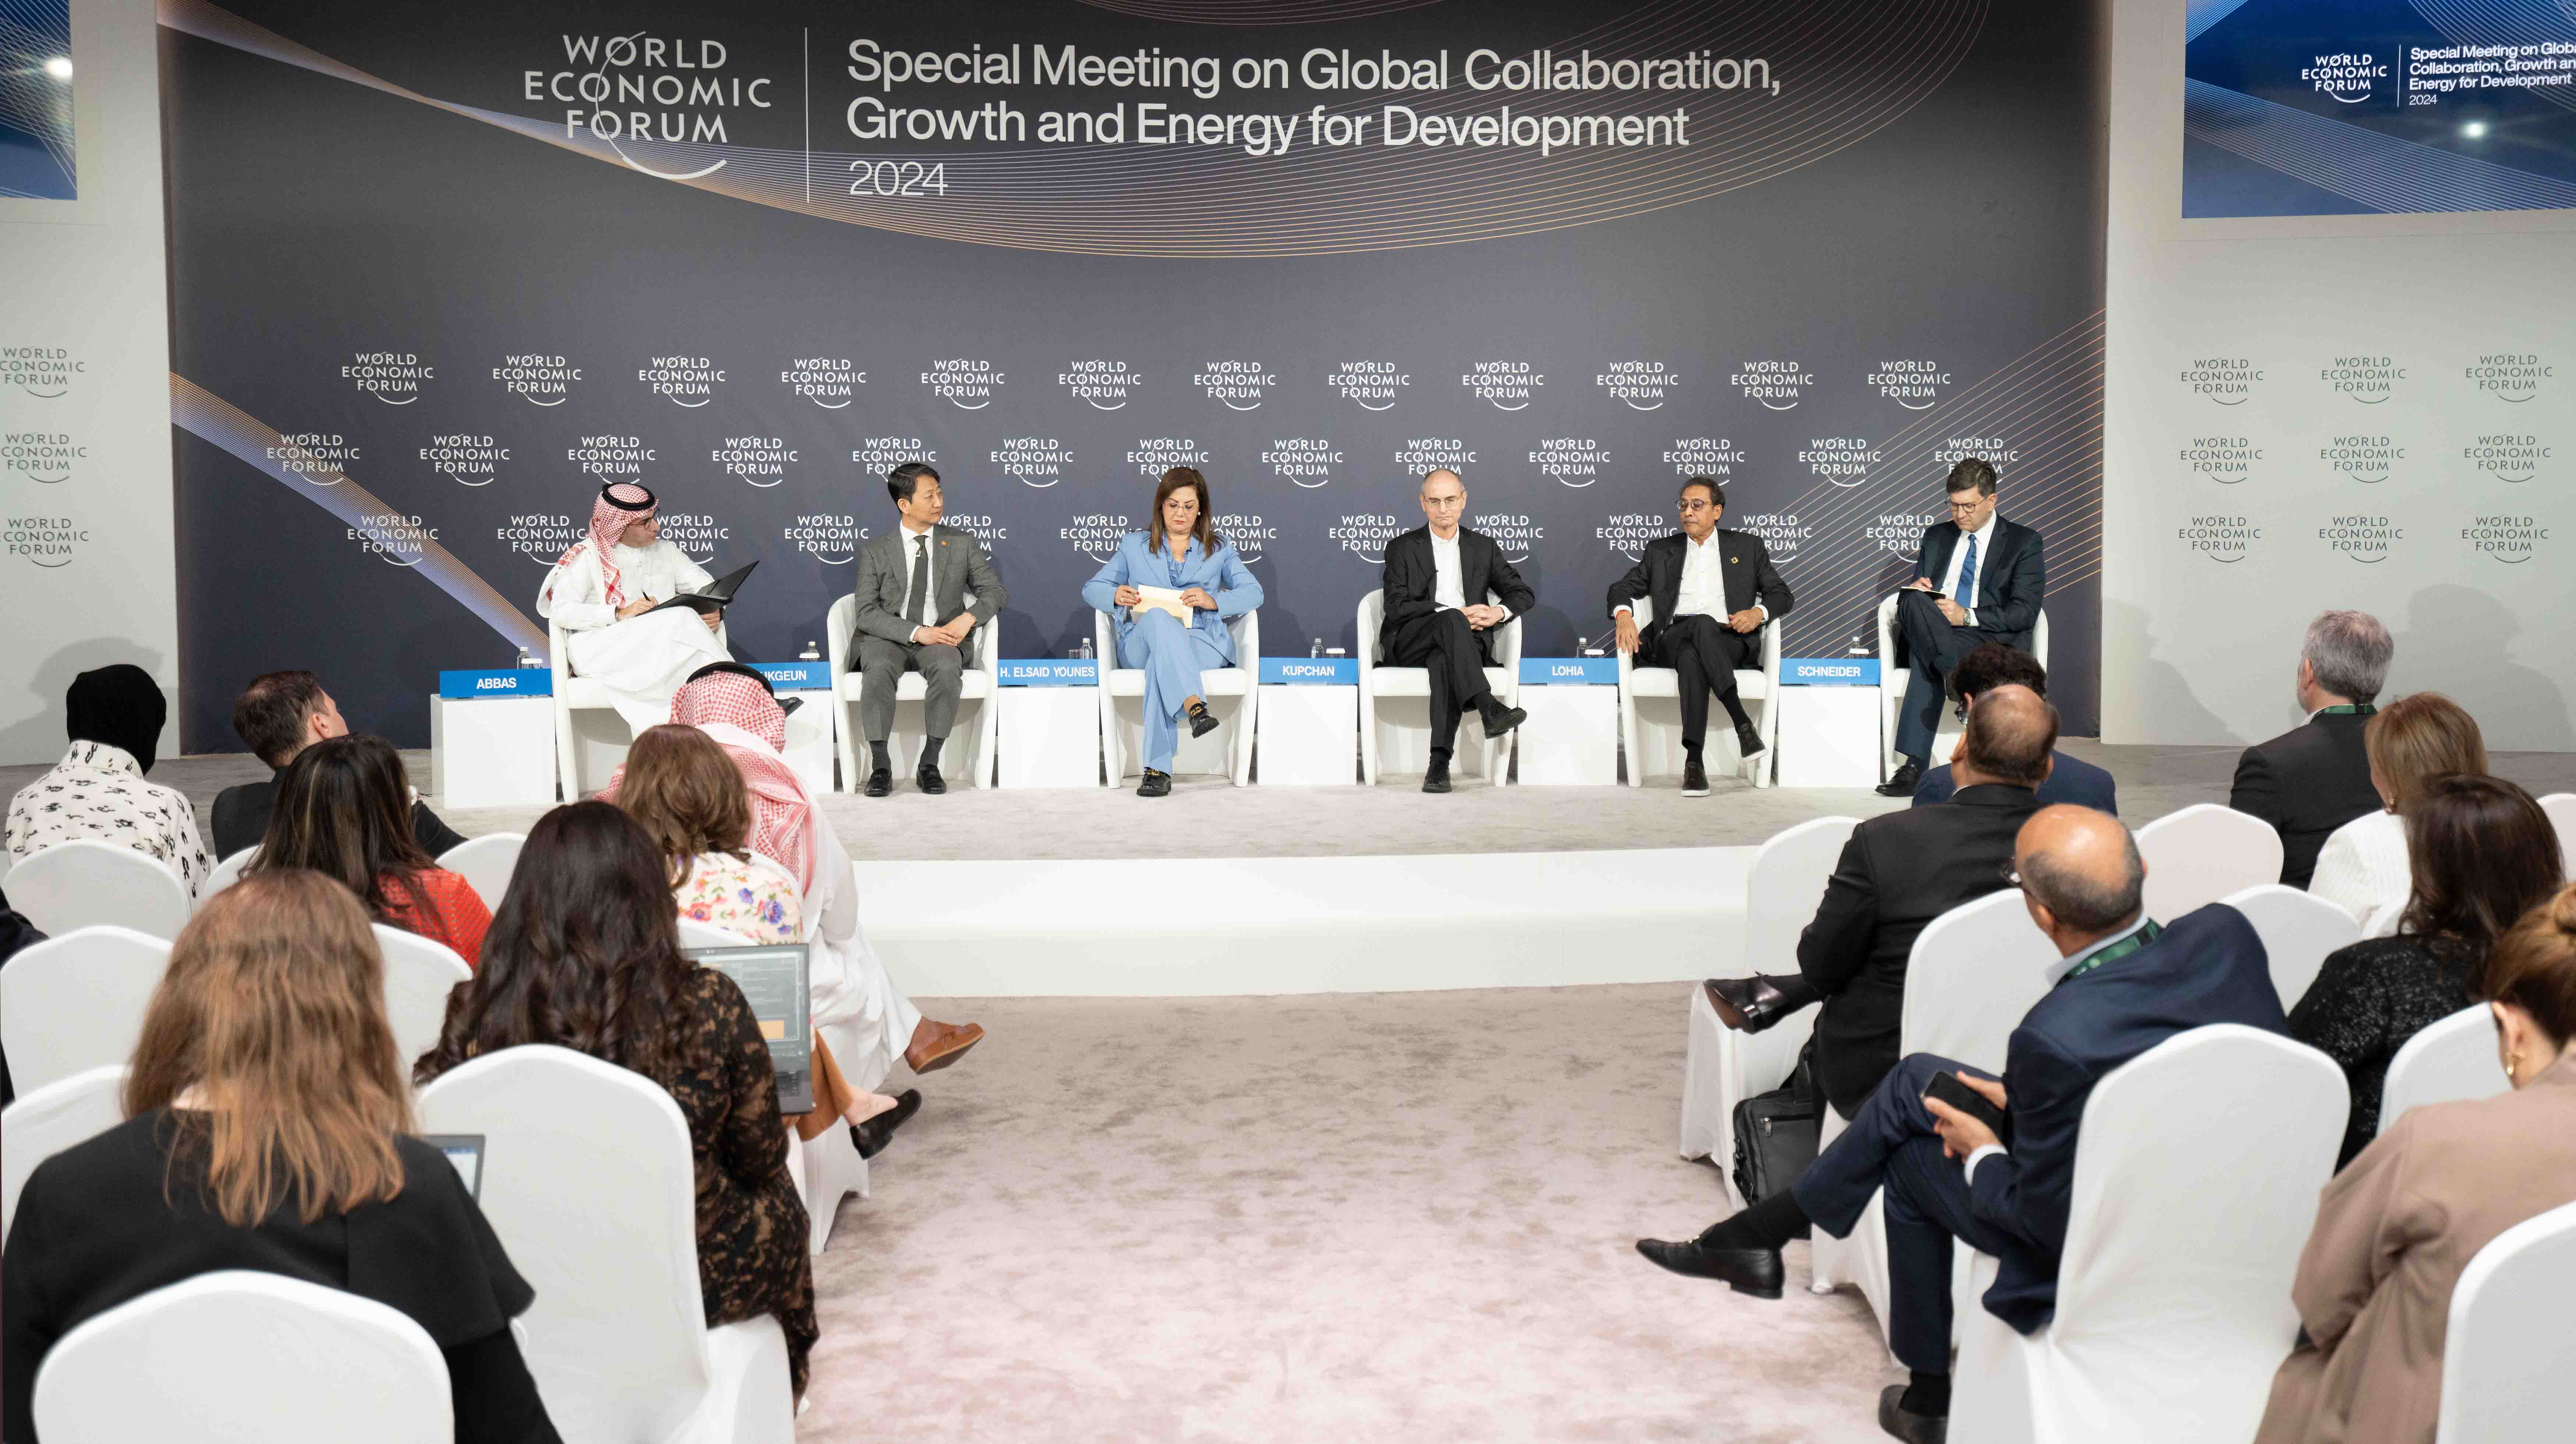 Minister participates as panel speaker at WEF Special Meeting